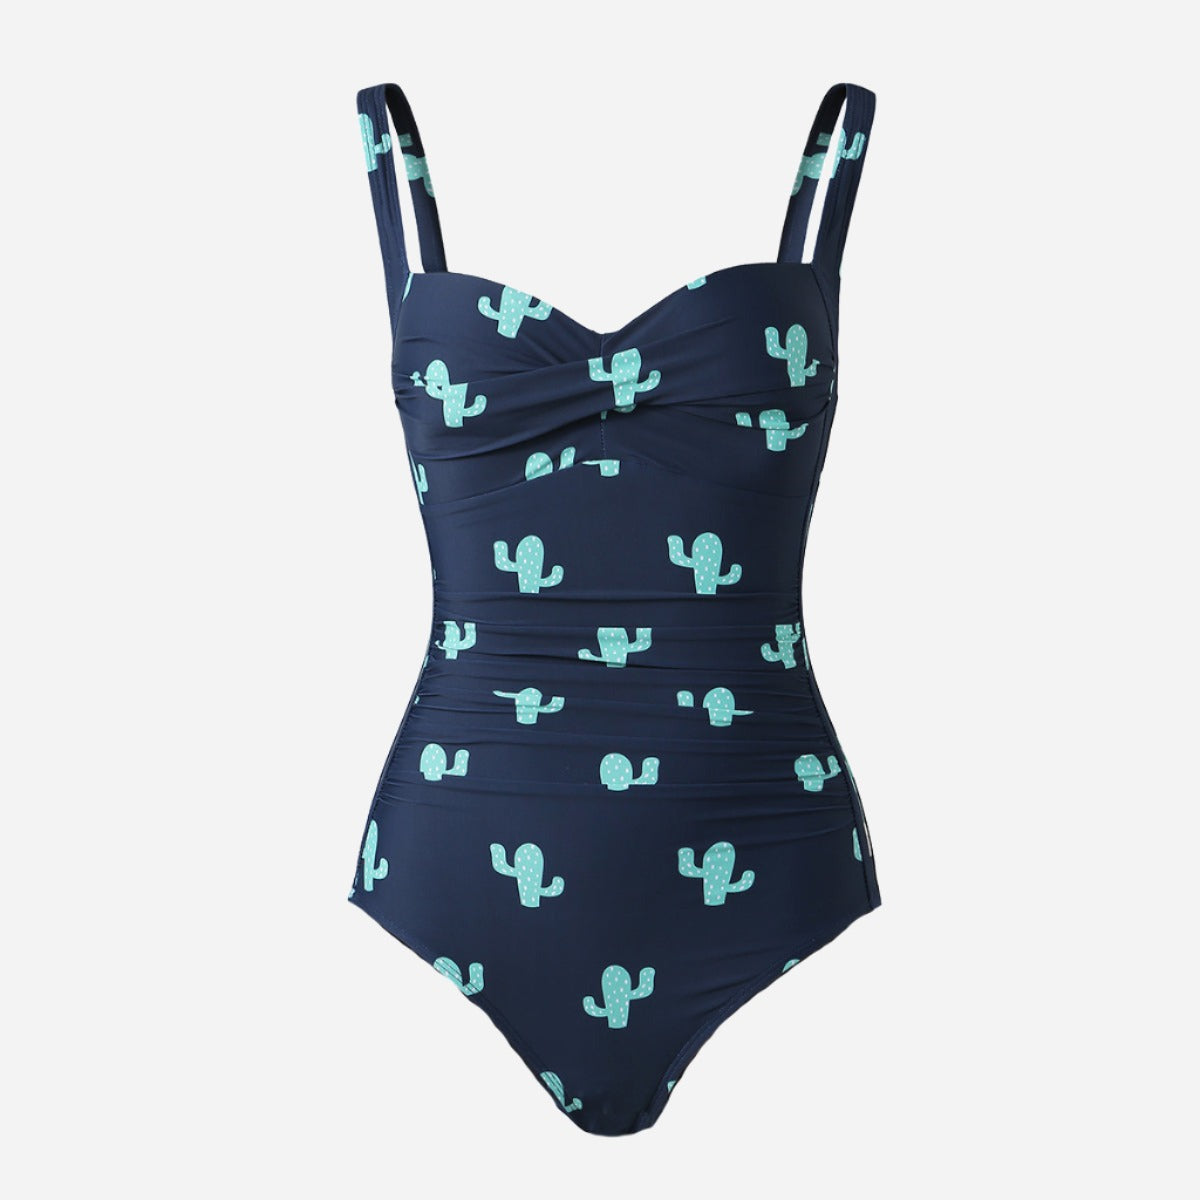 Cactus Print One Piece Cupless Swimsuit, Swimsuits